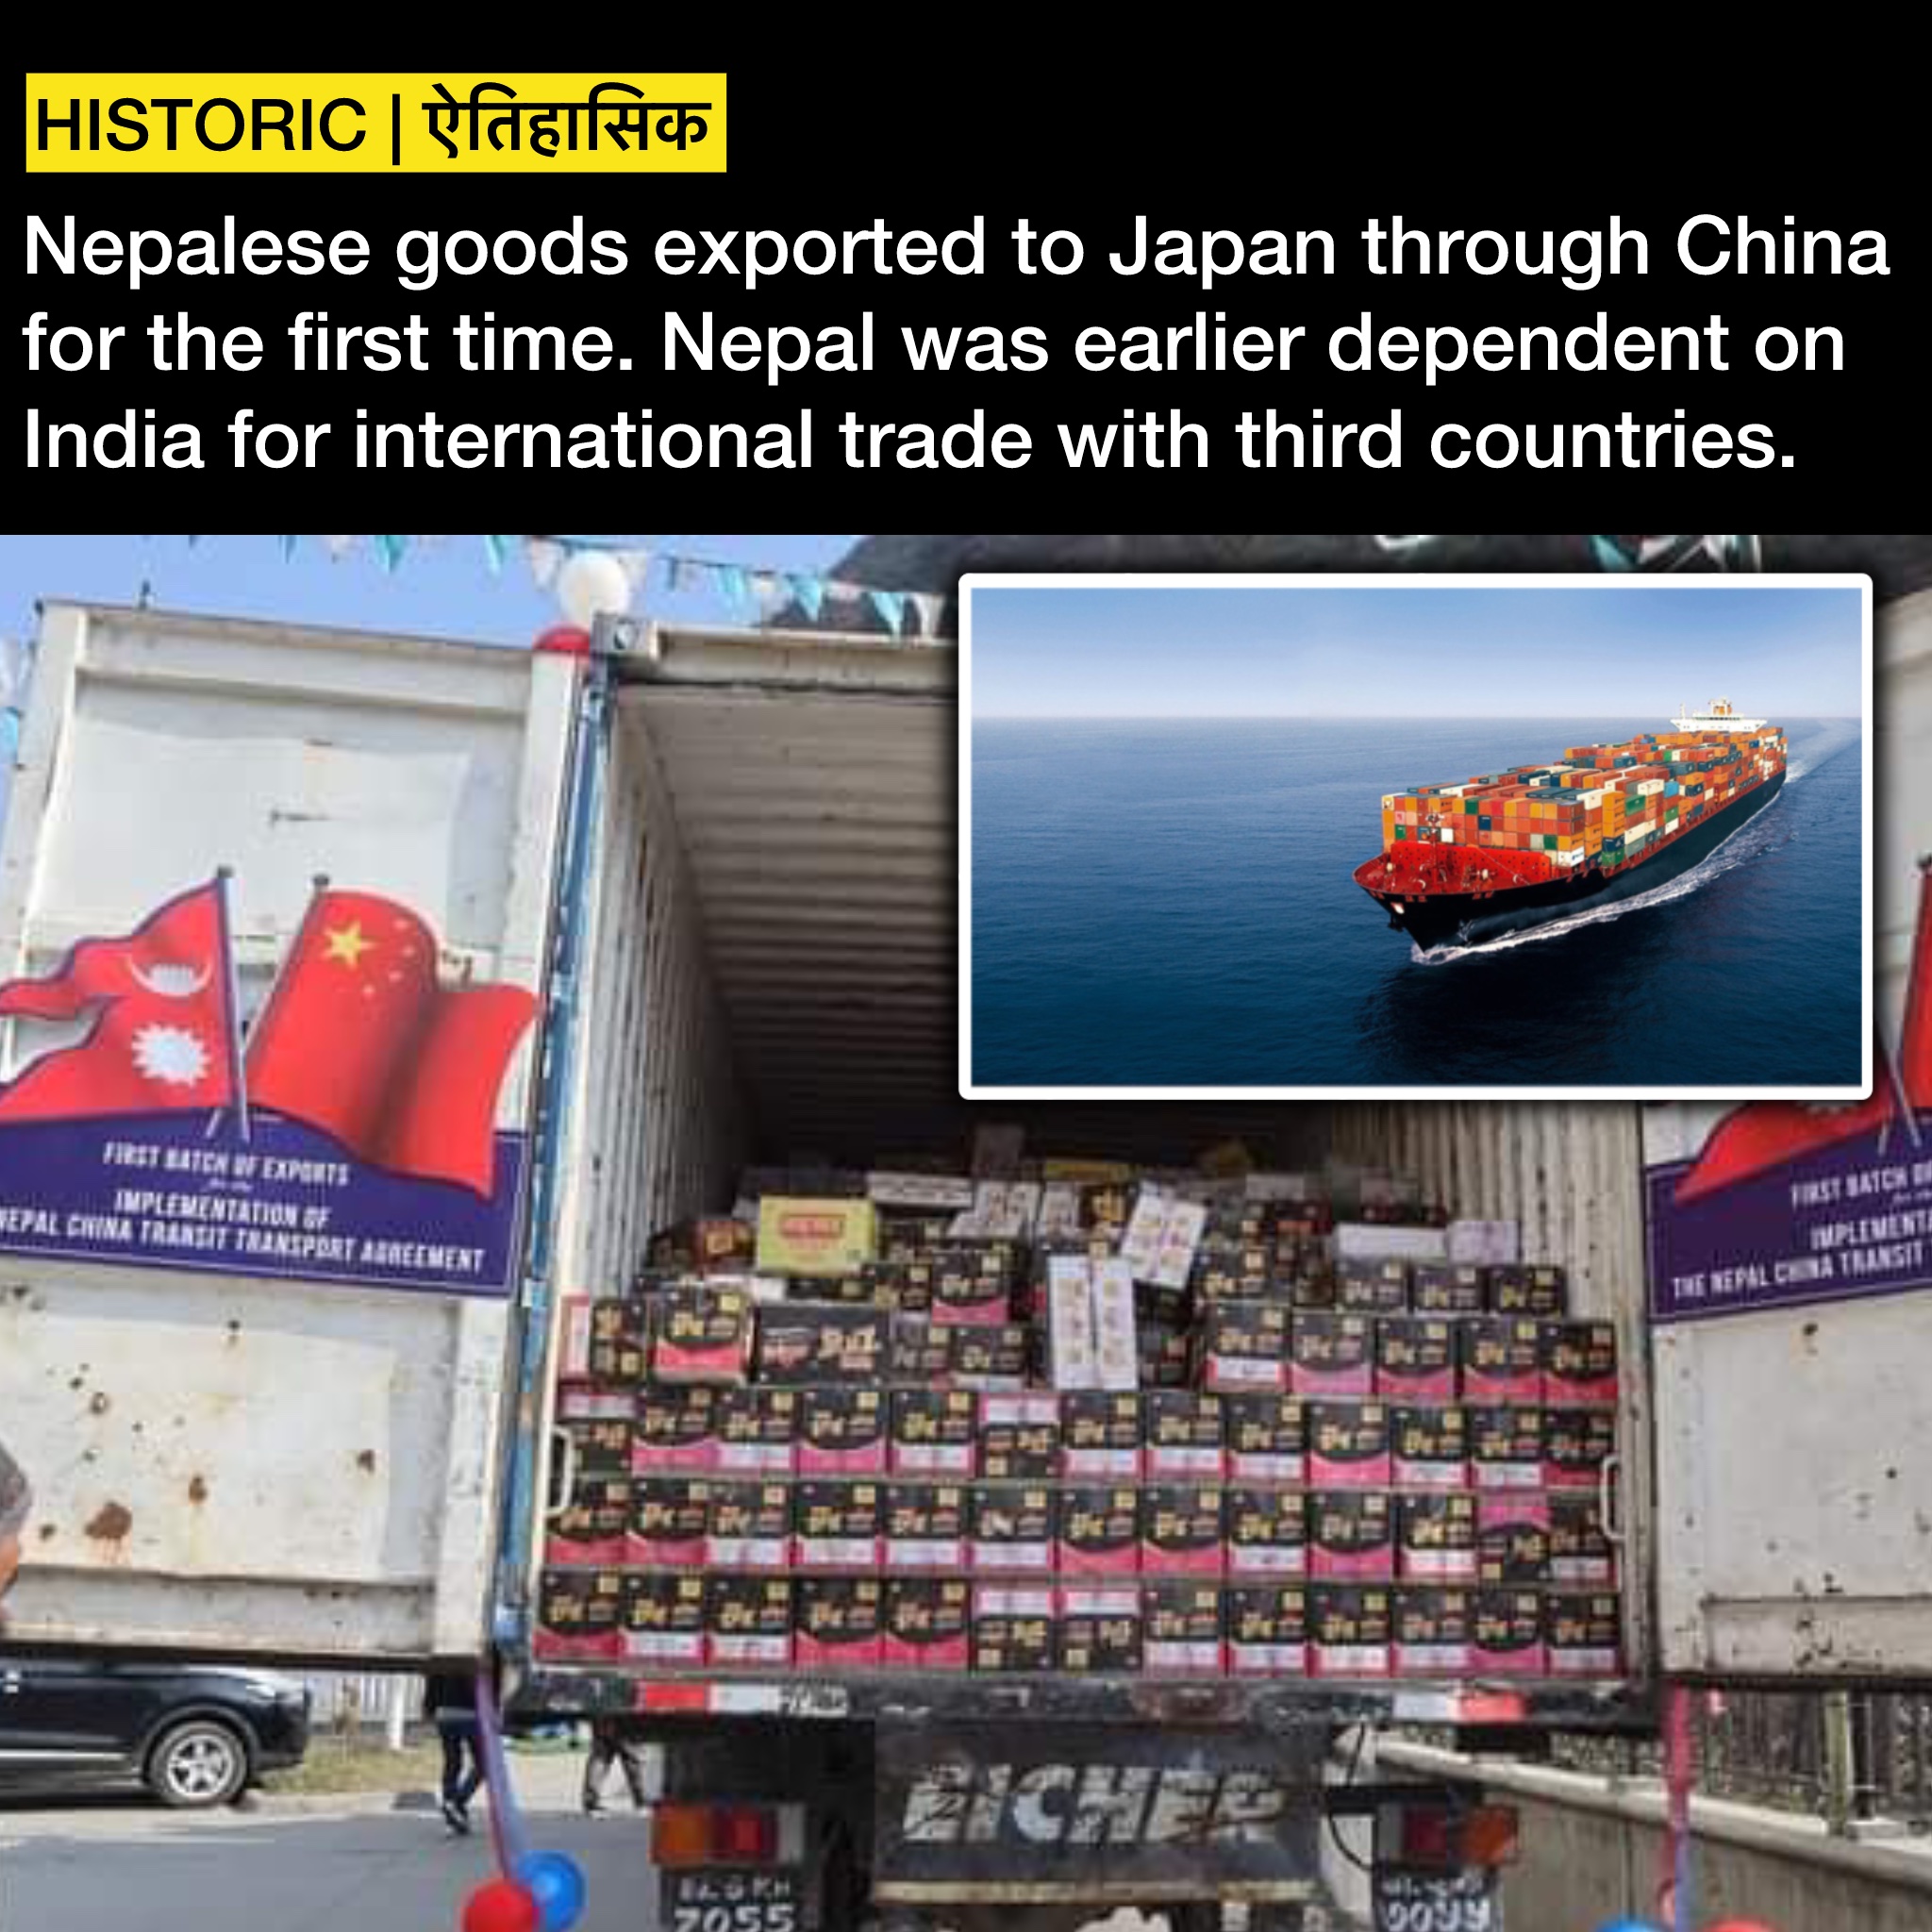 Nepal exports goods to Japan through China for the first time